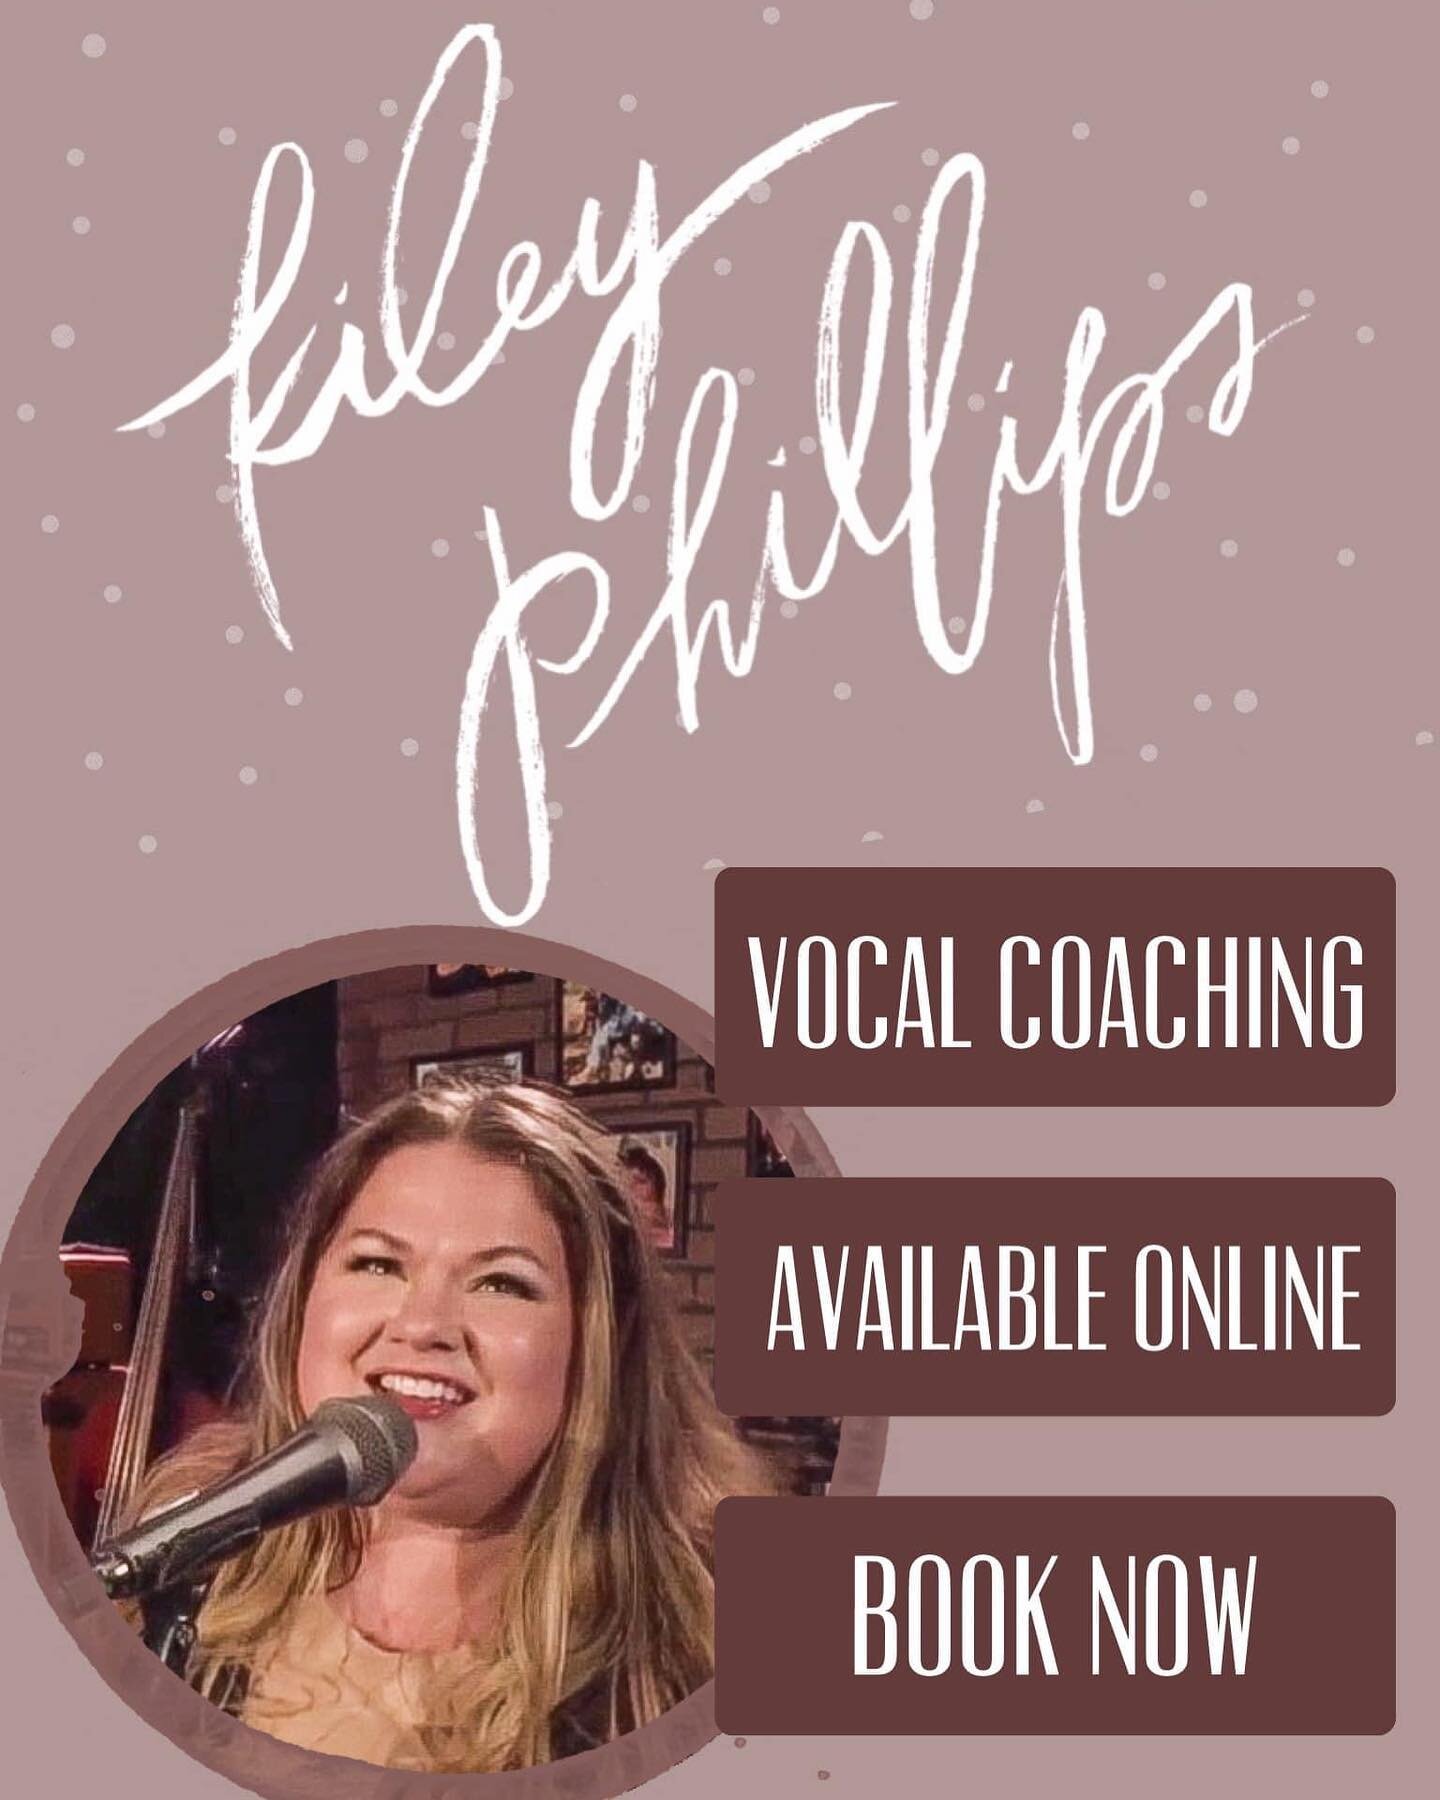 IT&rsquo;S OFFICIAL! 

I&rsquo;M OFFERING VOICE LESSONS THIS SUMMER!

SUMMER SESSION DETAILS:
-JUNE 4th through JULY 30th.
-One-on-one lessons via Zoom
-Beginner to intermediate vocal students welcome.
-Meet once a week.

Reach out to me on FB messen